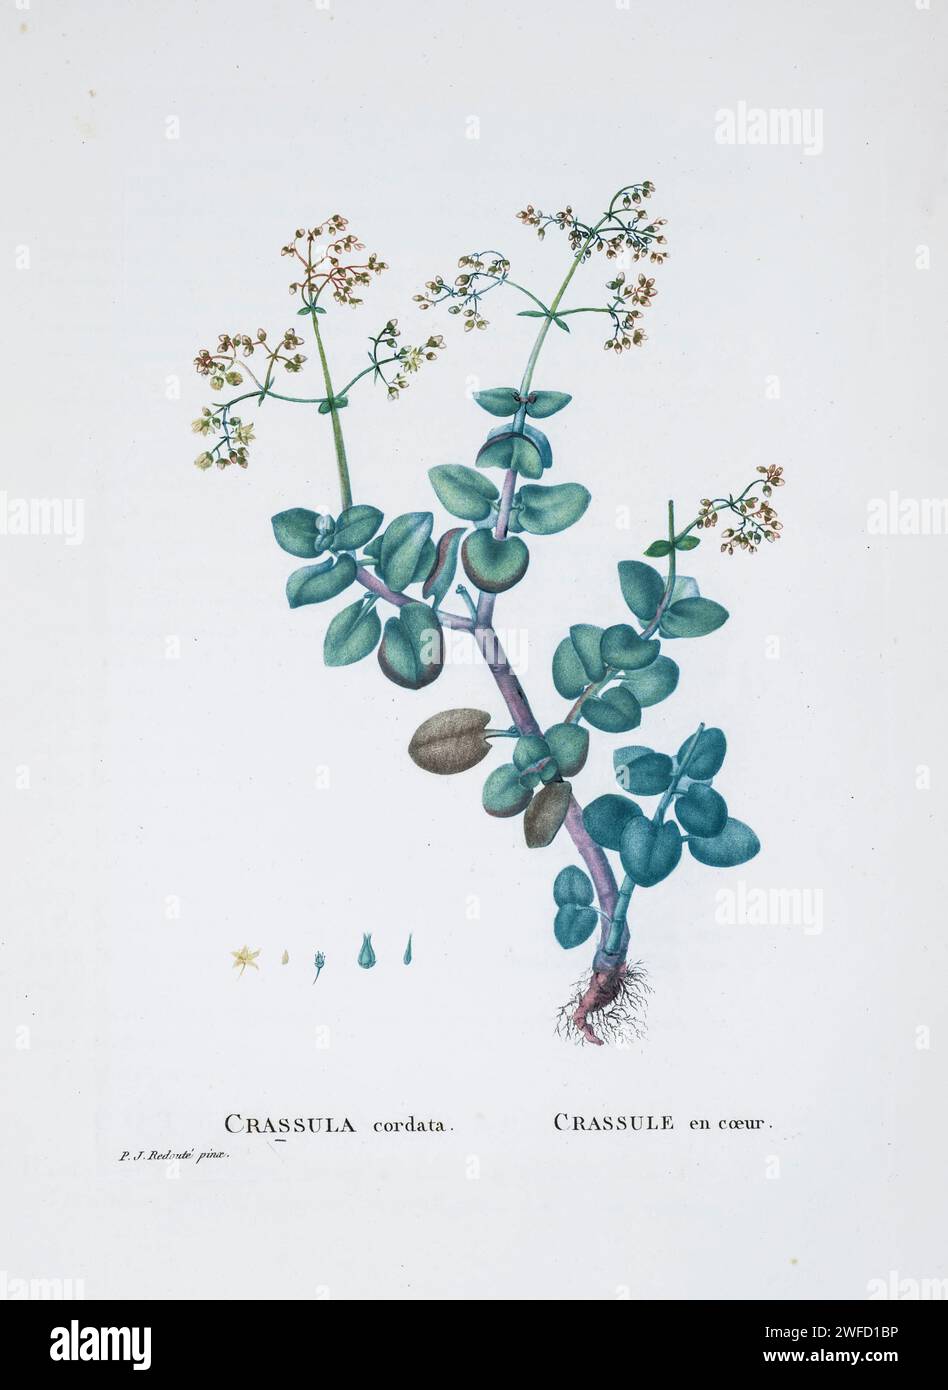 Crassula cordata from History of Succulent Plants [Plantarum historia succulentarum / Histoire des plantes grasses] painted by Pierre-Joseph Redouté and described by Augustin Pyramus de Candolle 1799 Stock Photo